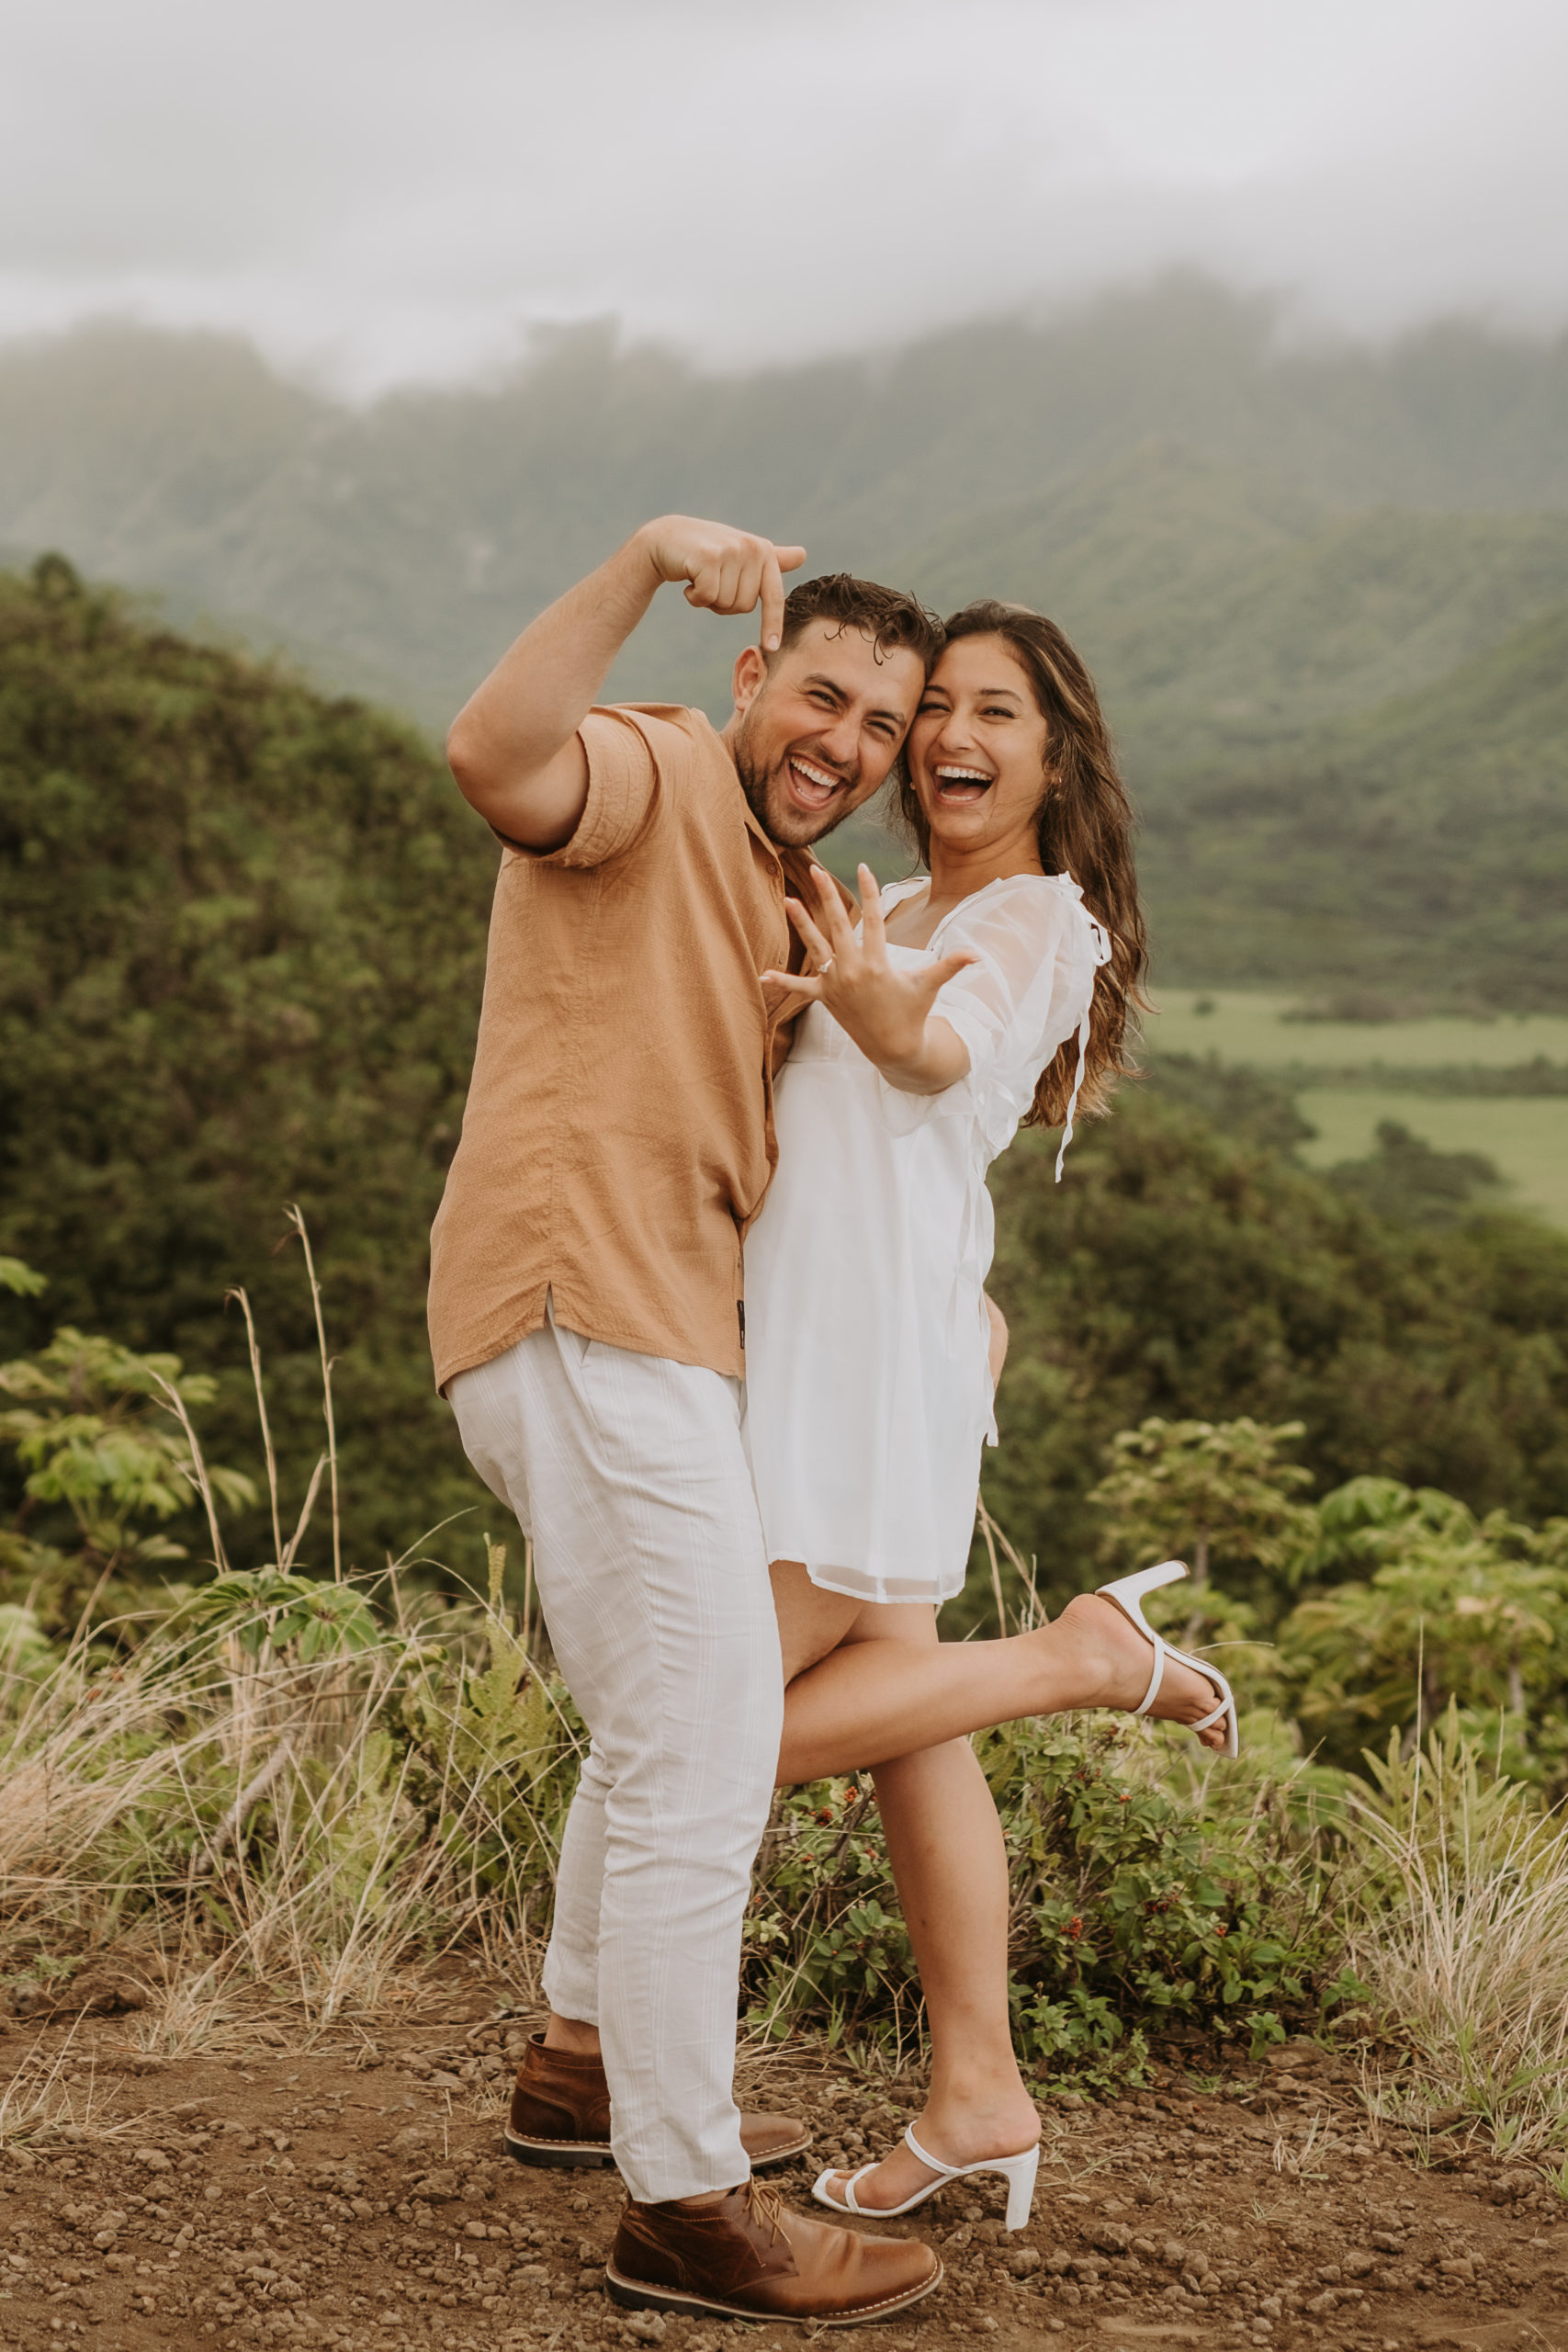 Hawaii Engagement Session inspiration during this Crouching Lion Adventure Engagement Session. Oahu Hiking Engagement Inspiration.